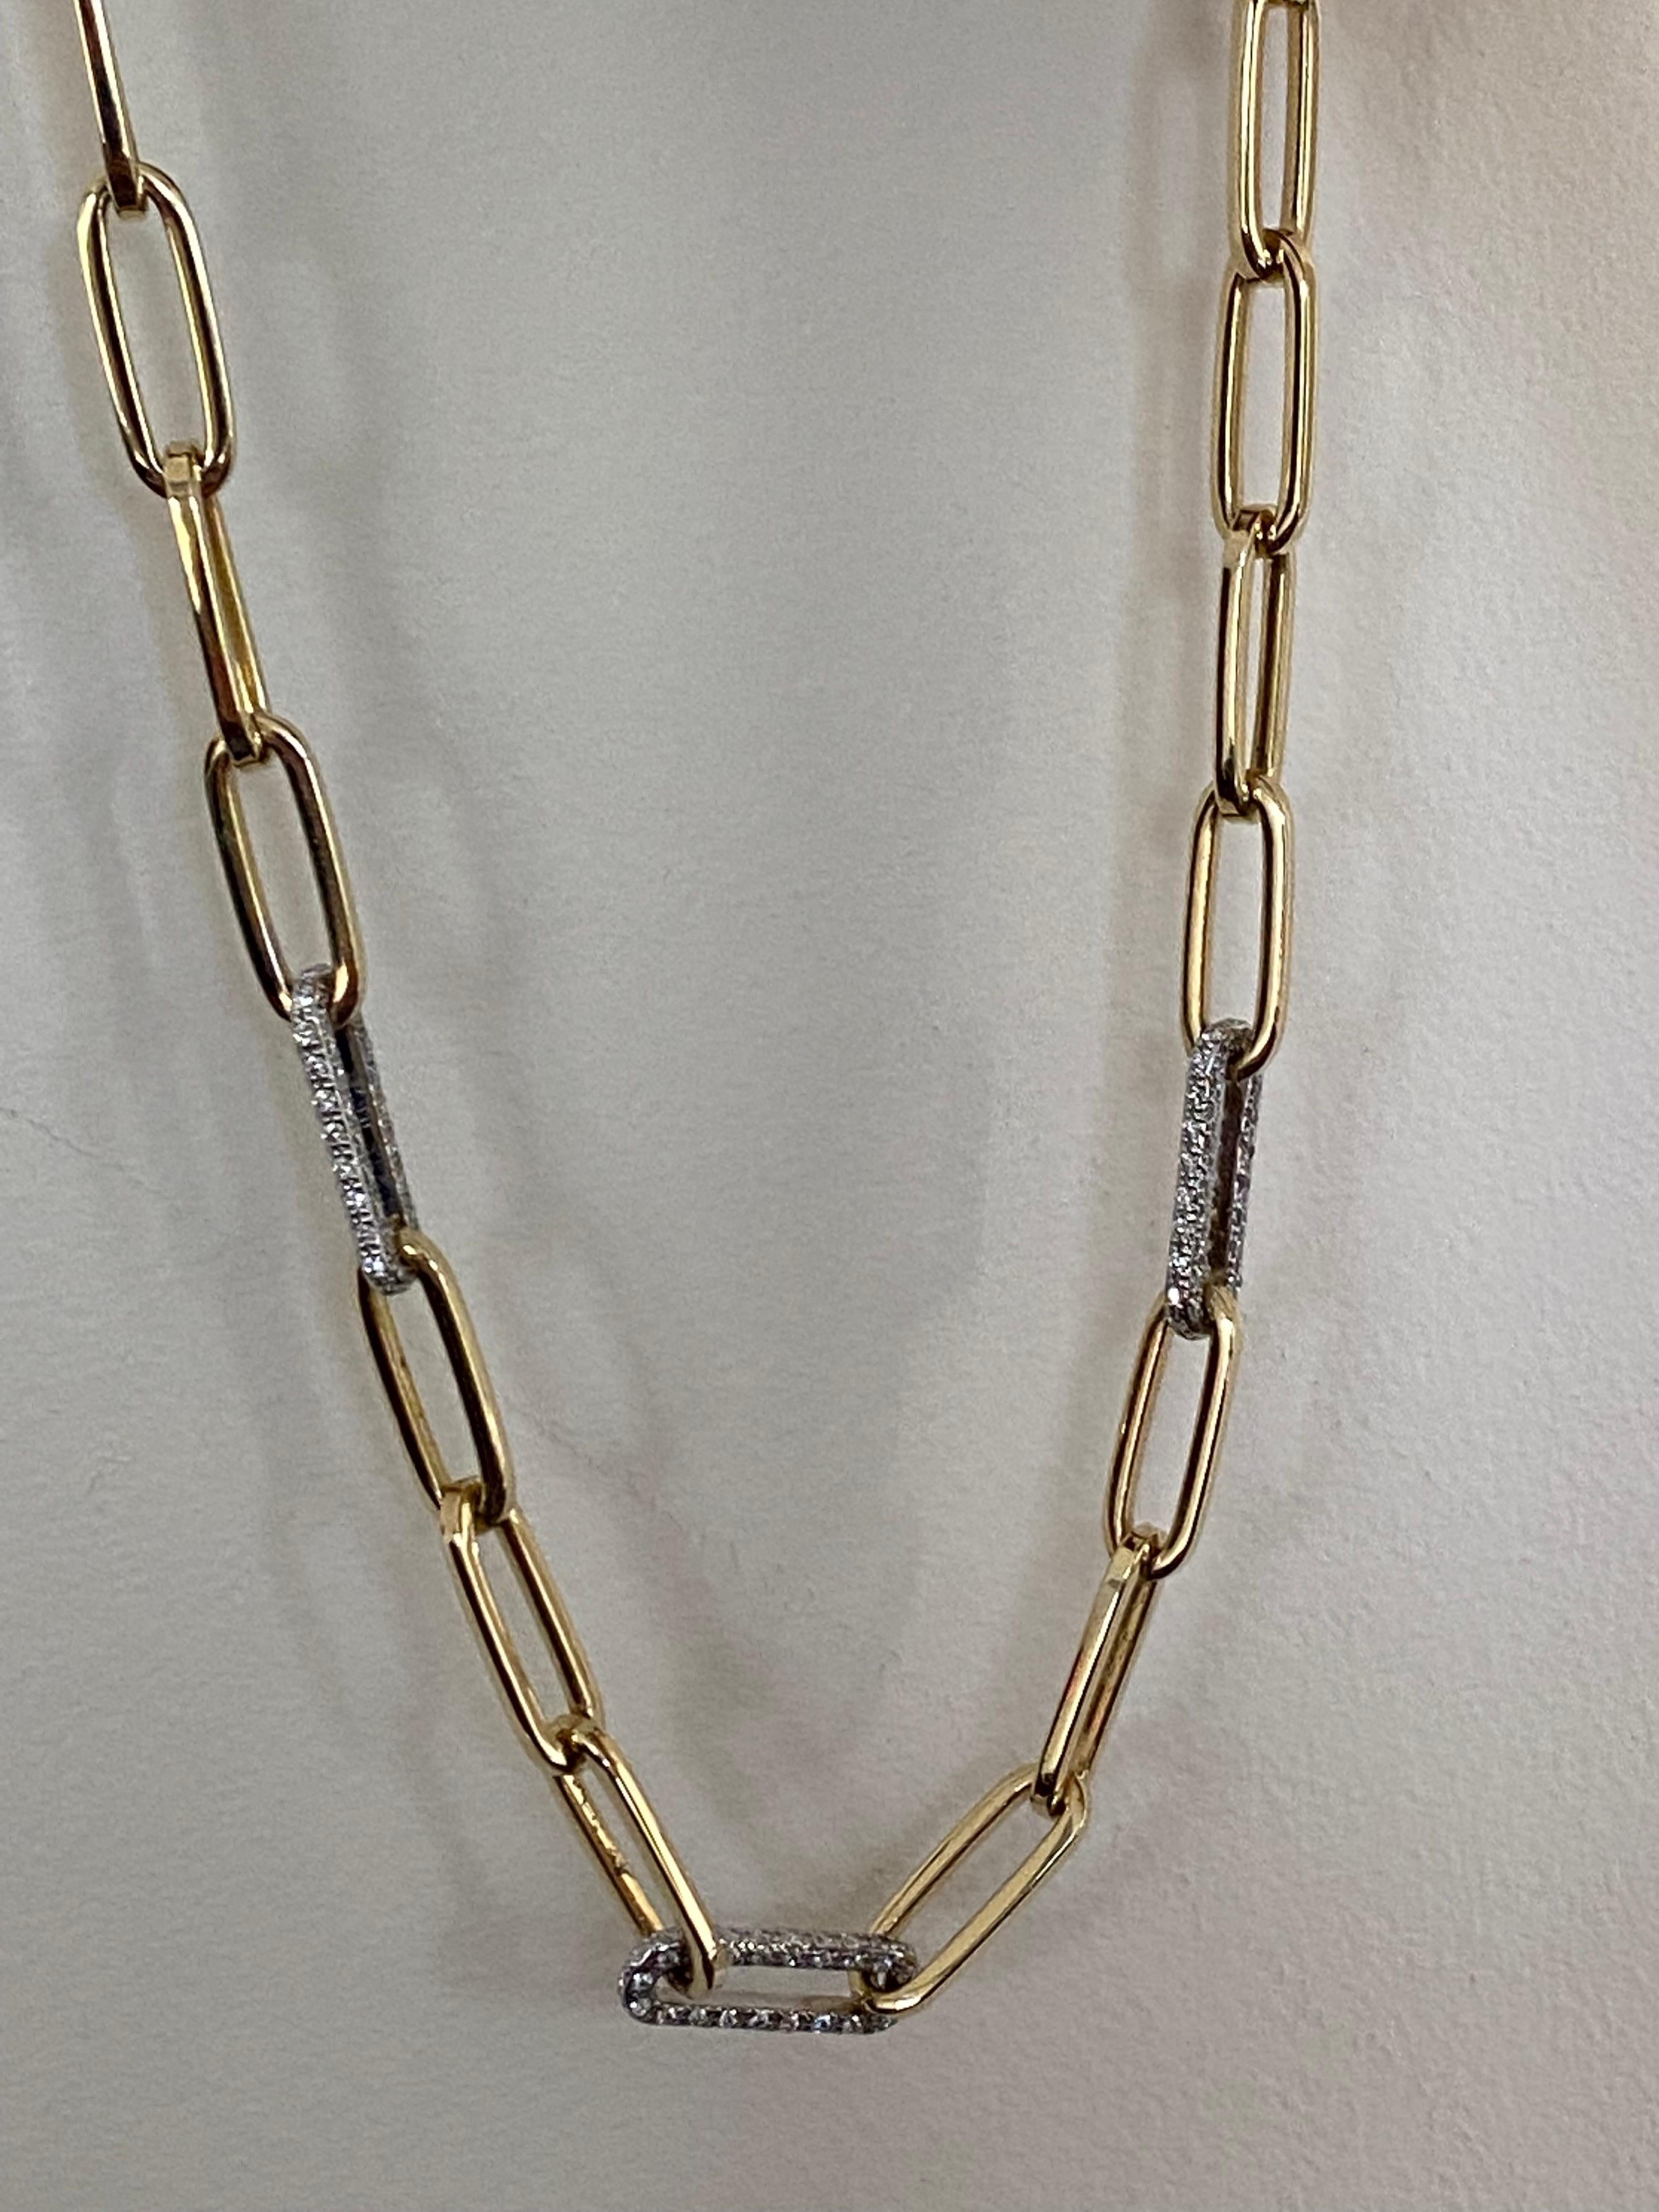 Paperclip necklace set in 14K yellow gold. 3 sections of the diamonds set part in white gold. The carat weight of the piece is 2.09. The color of the stones are G, the clarity is SI1-SI2. The necklace is 16 inches.